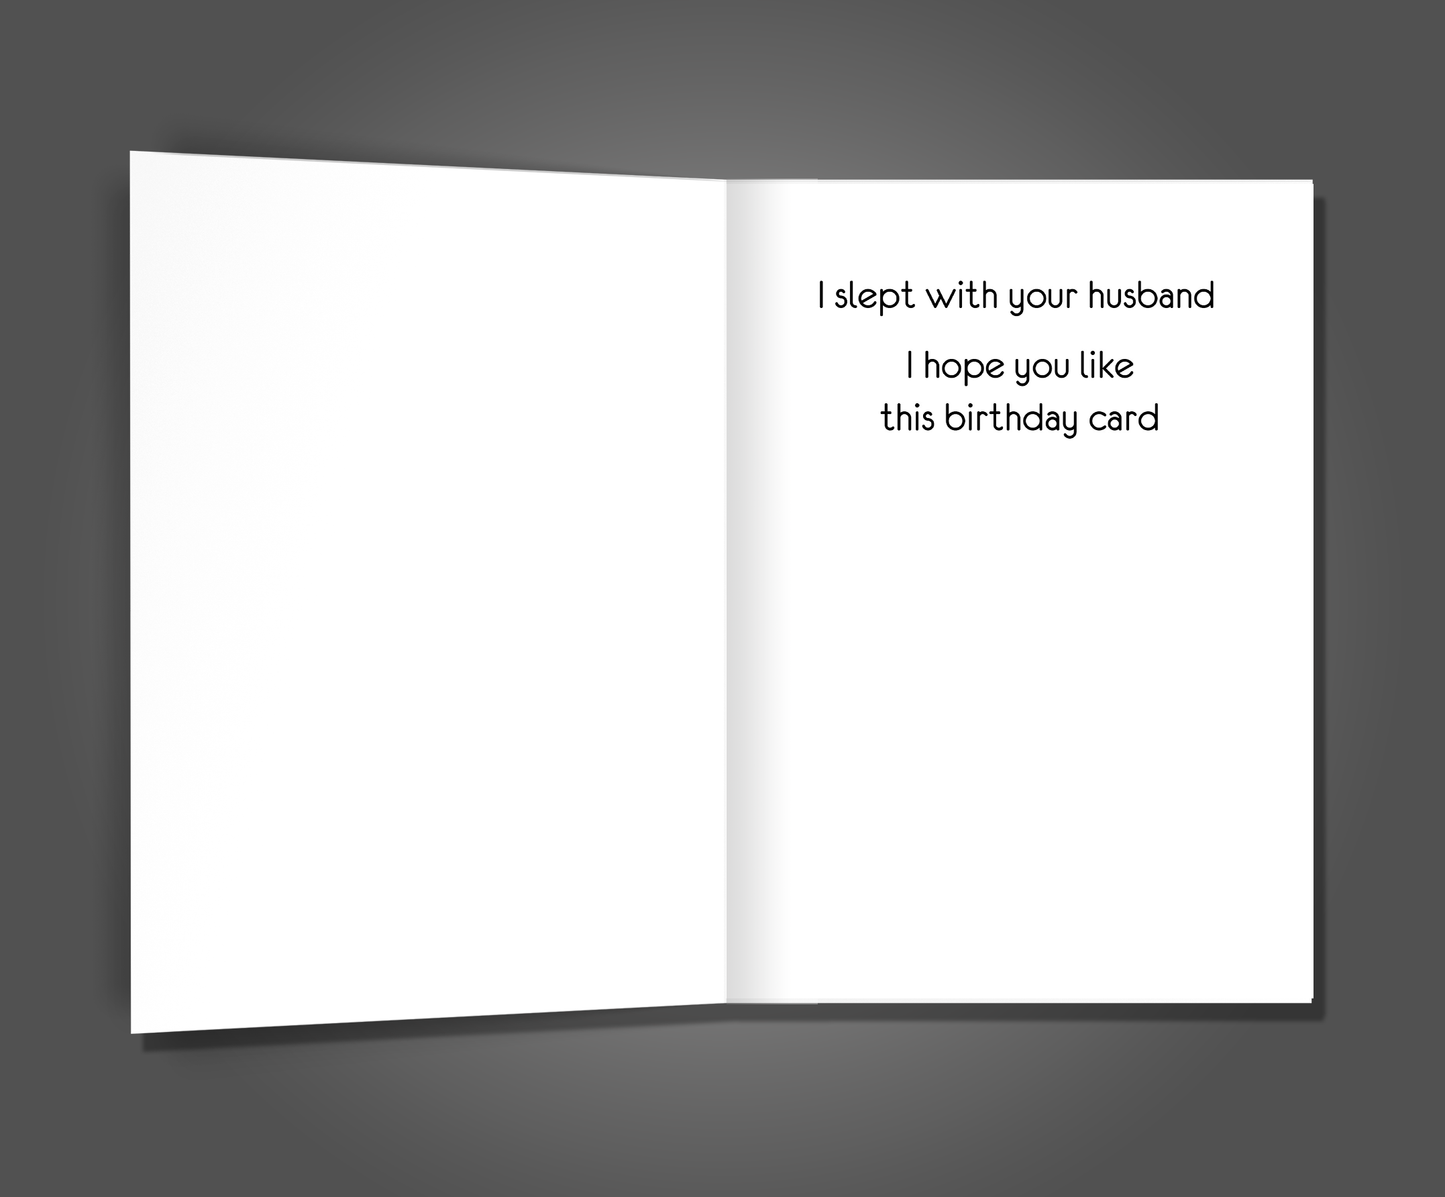 I Slept With Your Husband, Birthday Card